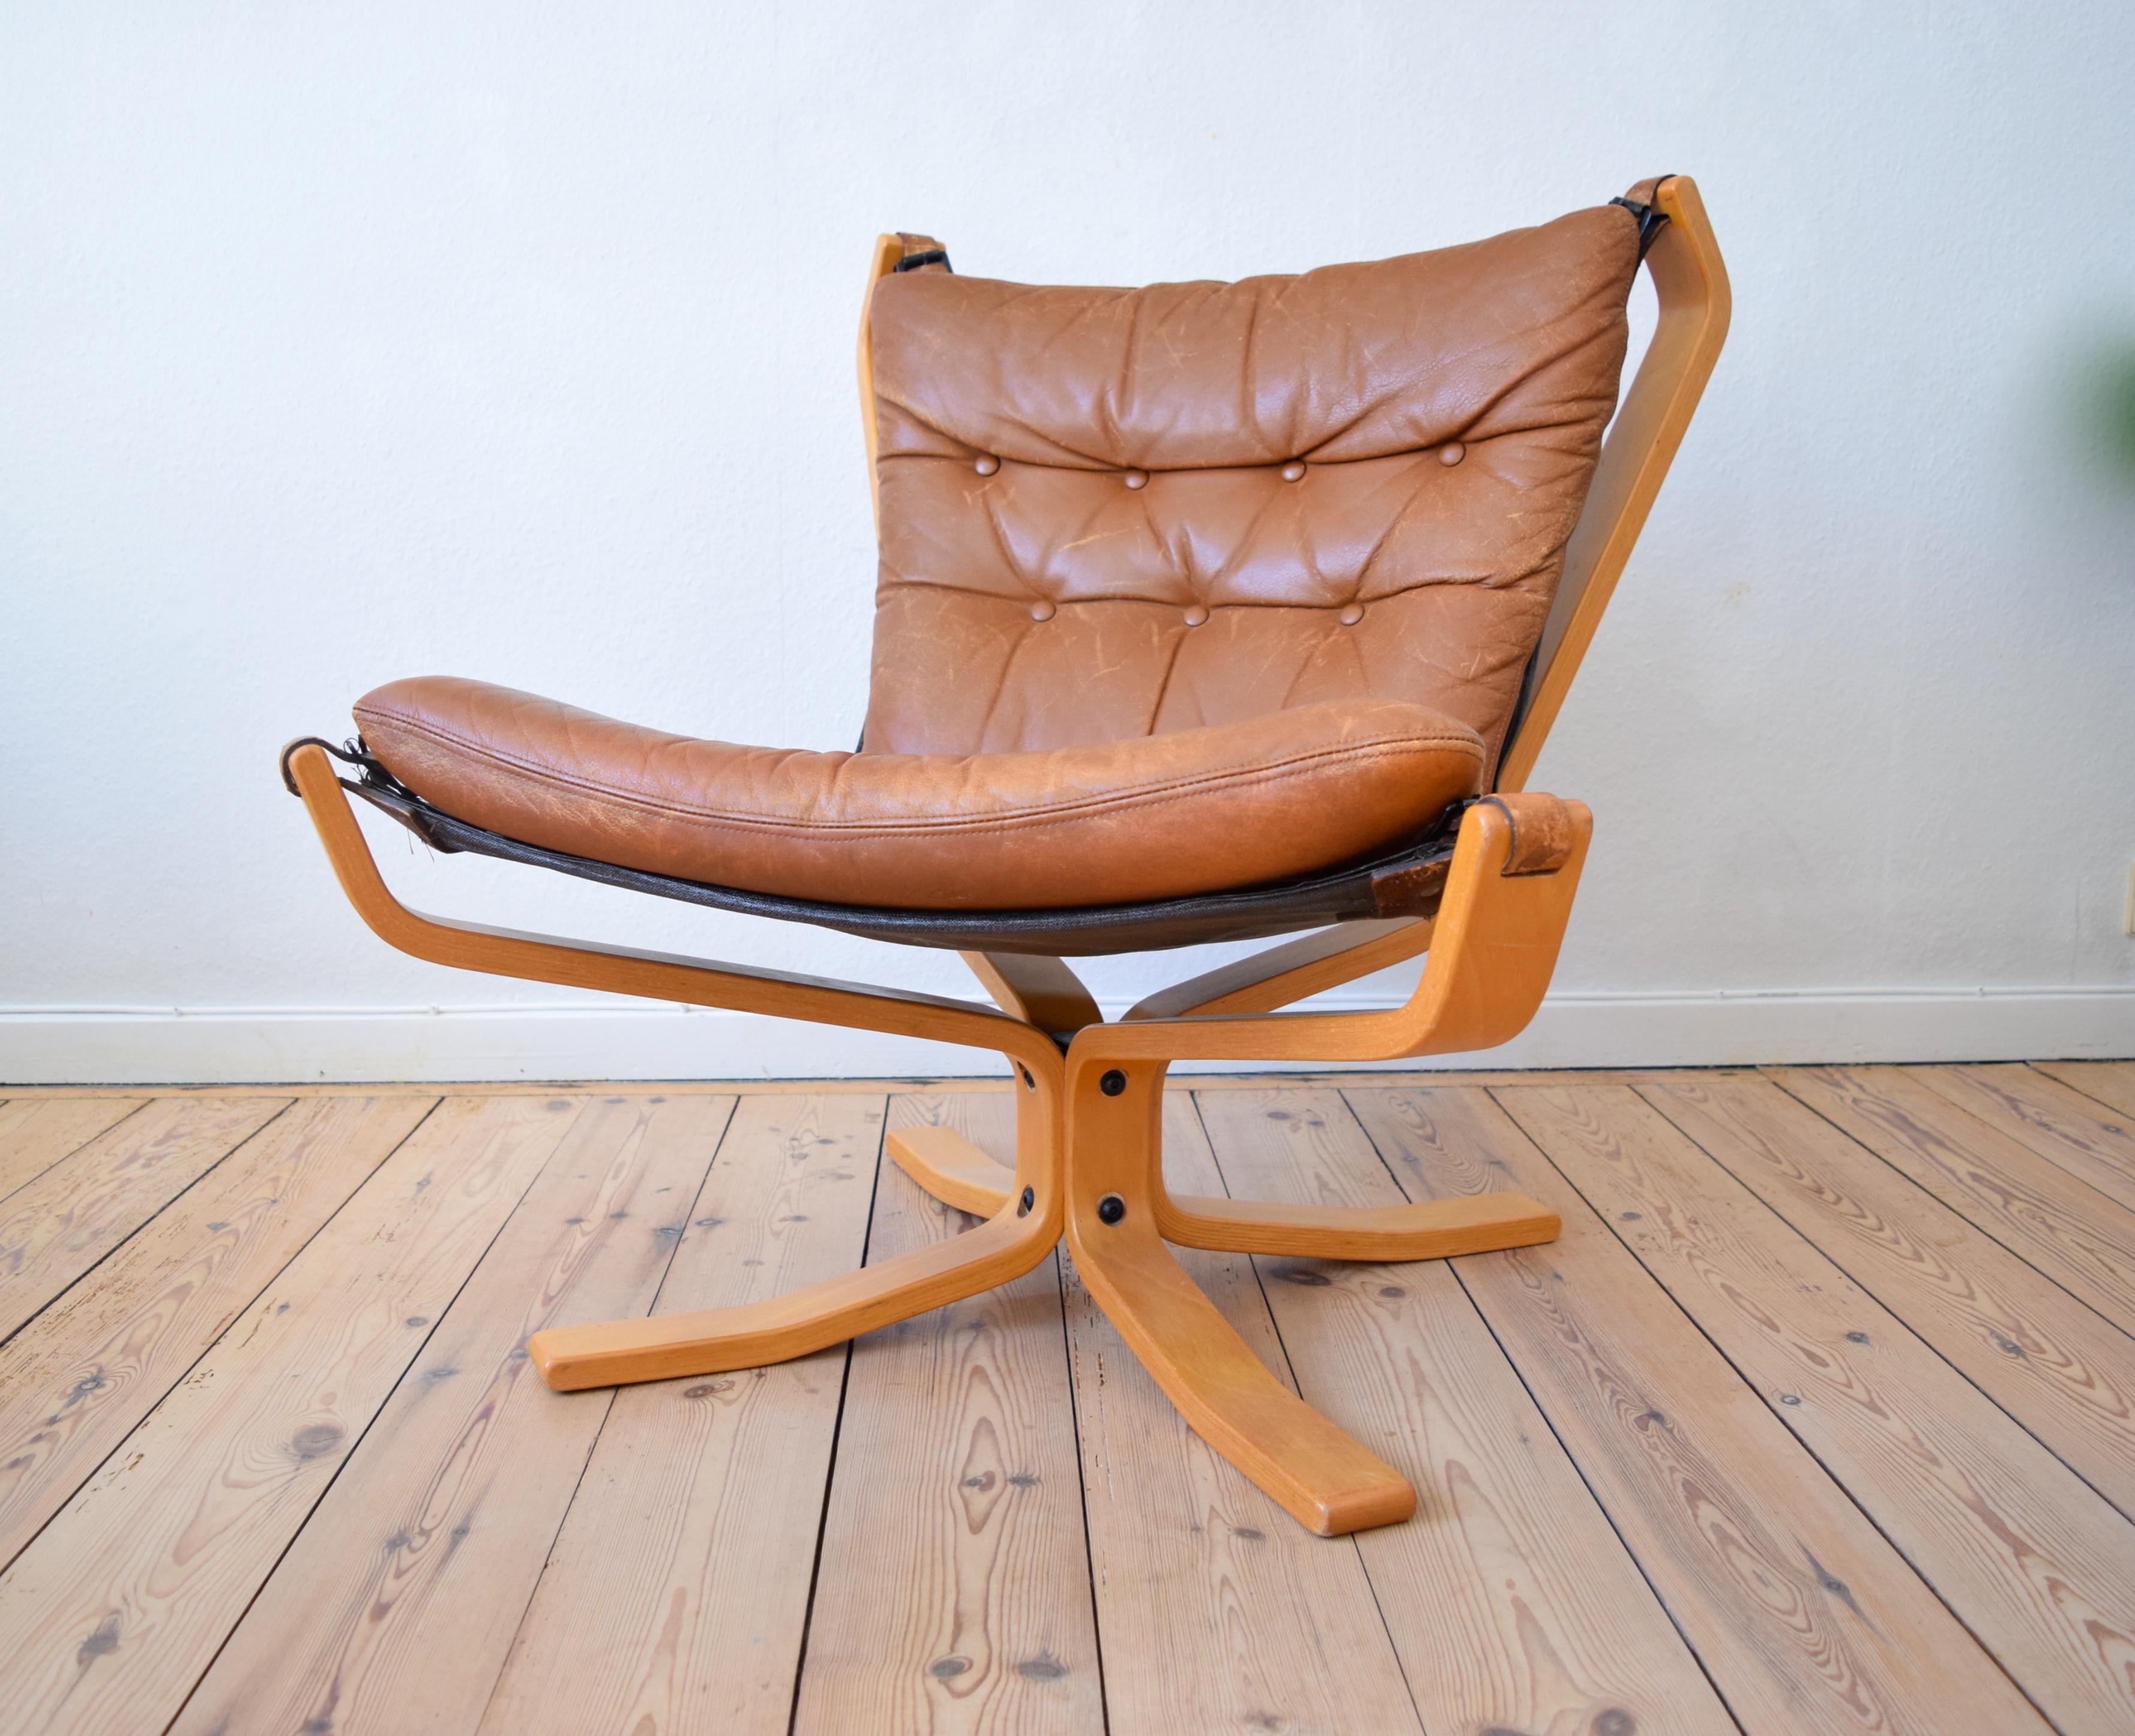 Cognac falcon chair designed by Sigurd Ressel and manufactured in Denmark in the 1970s. This chair features a cognac leather cushion which sits in place on the harness by means of a zip and velcro. The harness is supported on a bent beechwood frame.